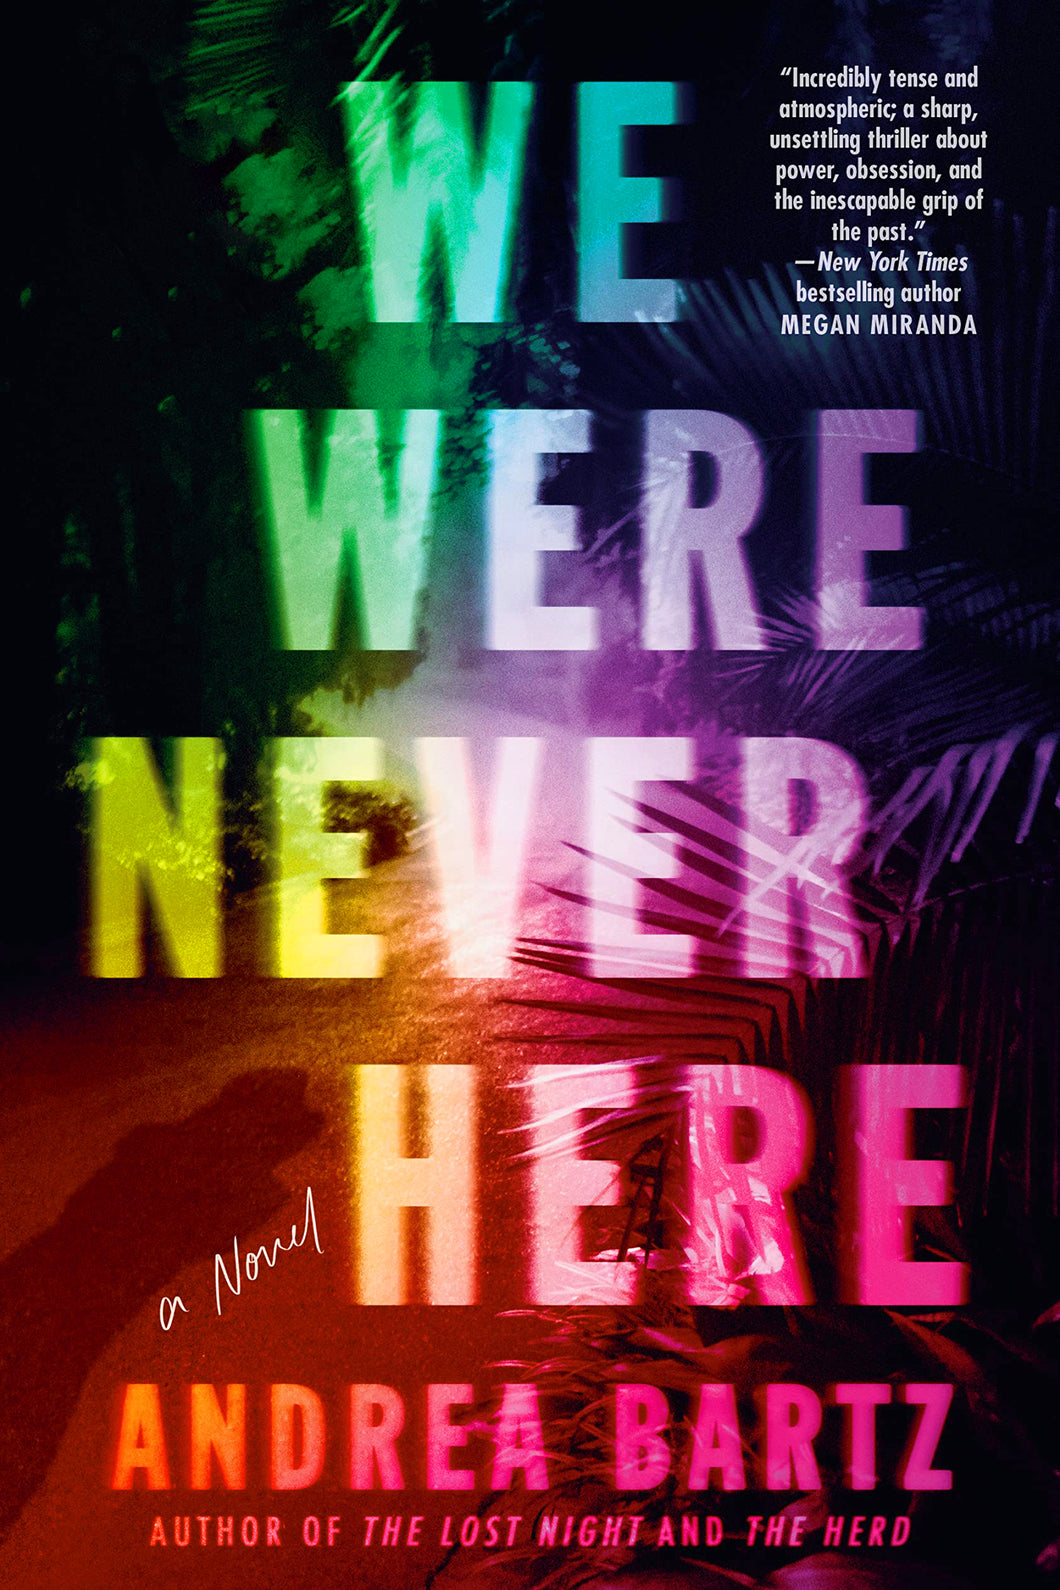 We Were Never Here by Andrea Bartz / Hardcover - NEW BOOK OR BOOK BOX